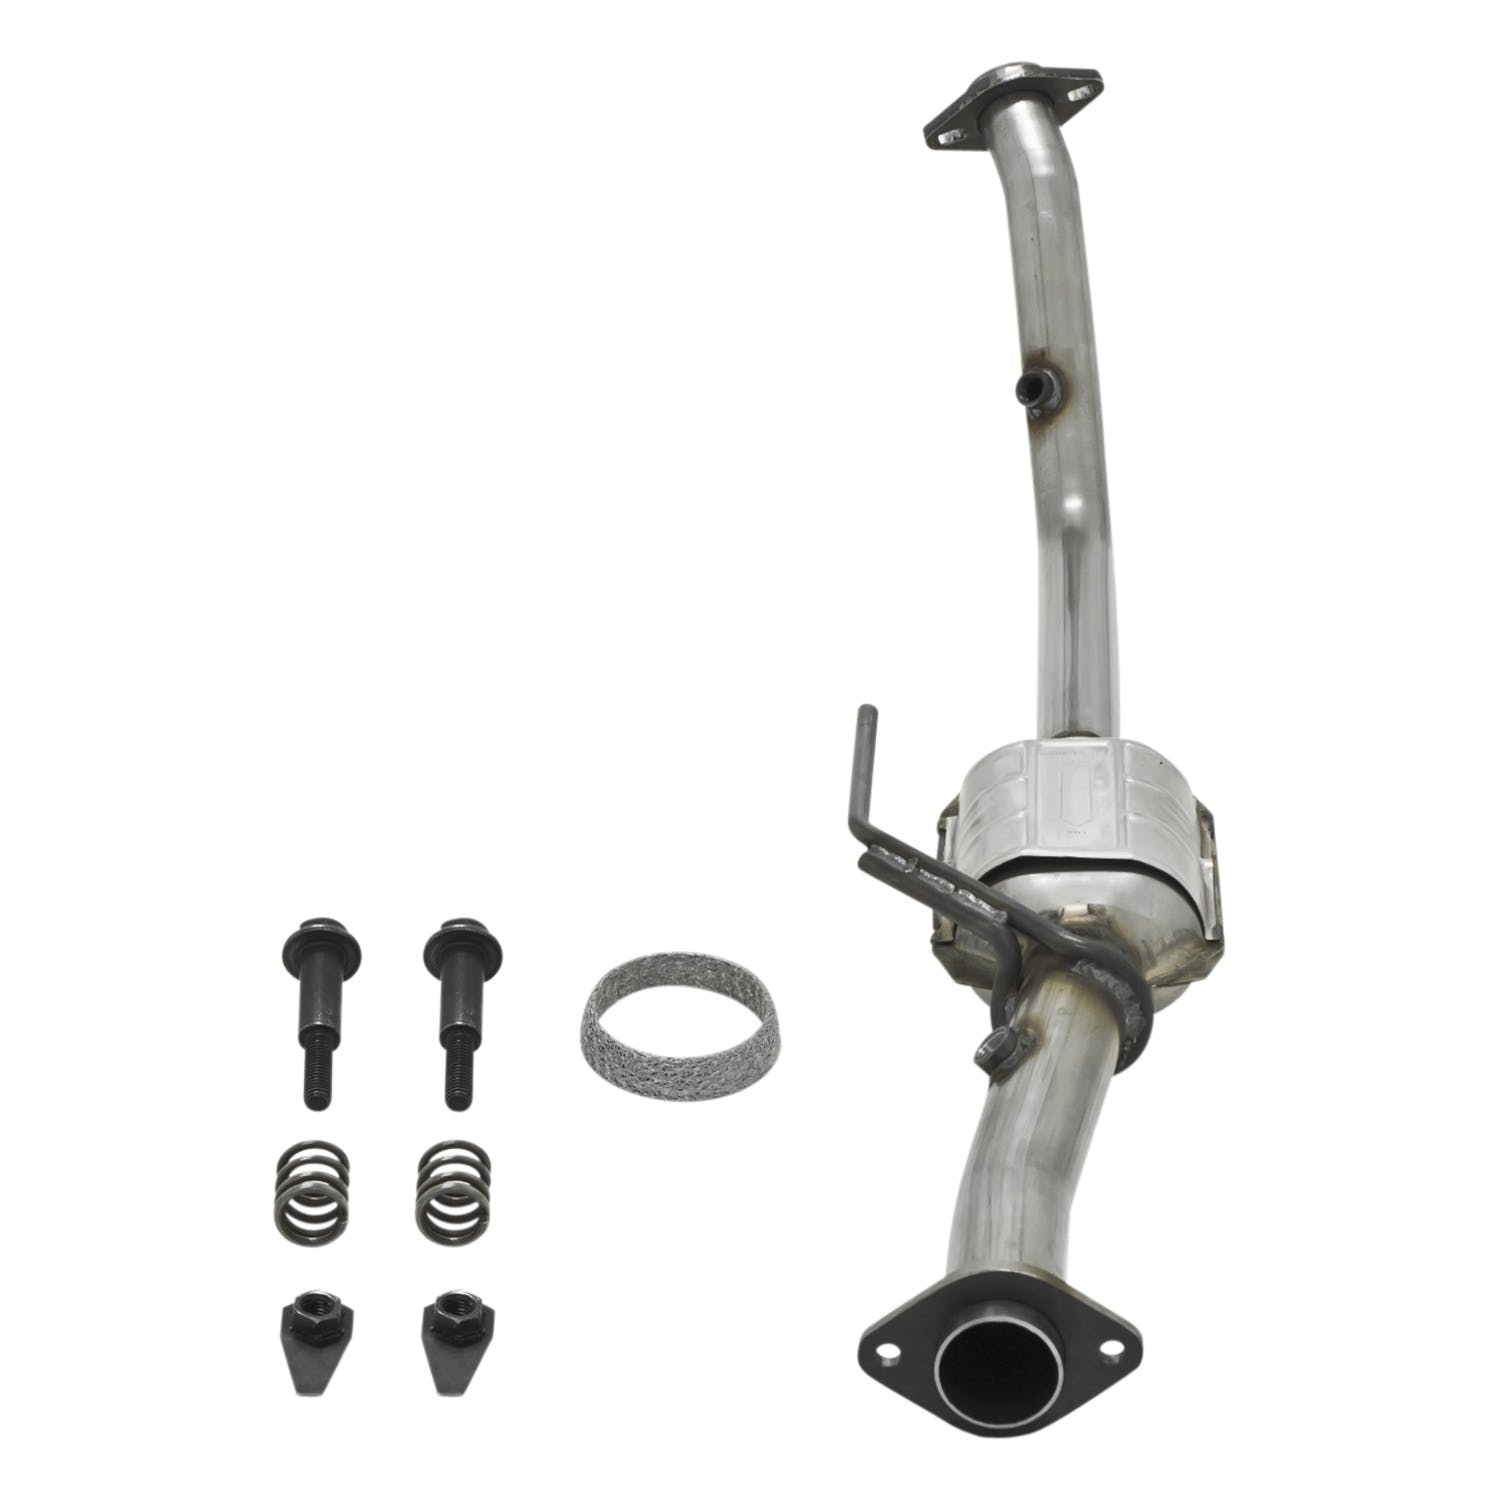 Flowmaster Catalytic Converters 2020031 Catalytic Converter-Direct Fit-2.00 Inlet 2.25 in. Outlet-49 State